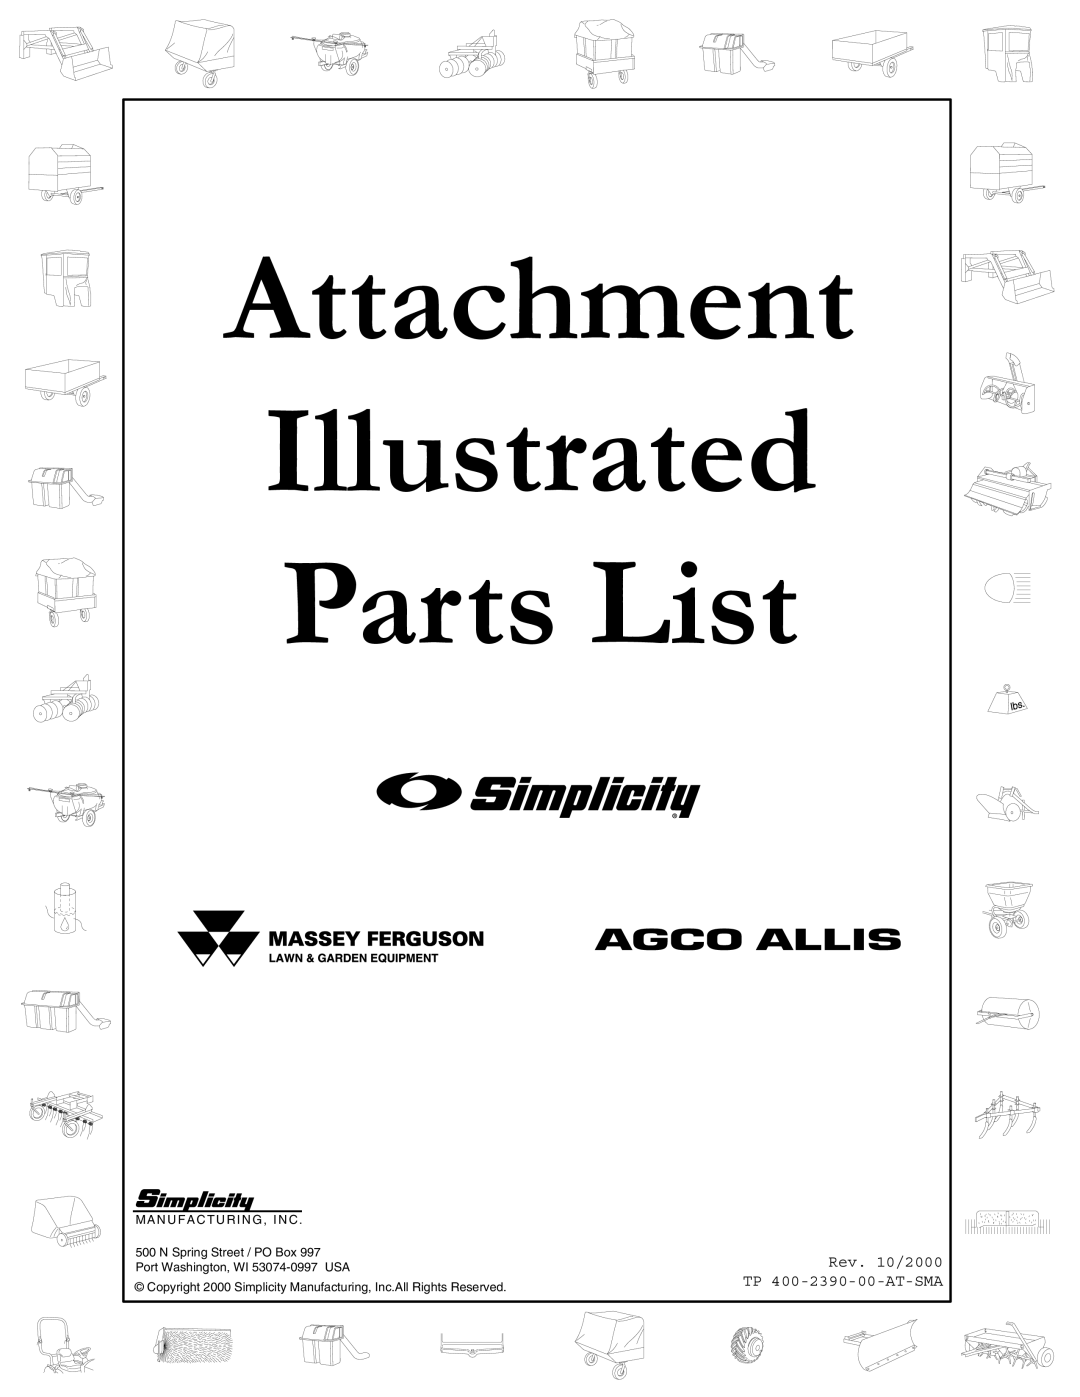 Simplicity 1693757 manual Attachment Illustrated Parts List, Rev. 10/2000 TP 400-2390-00-AT-SMA, N Spring Street / PO Box 